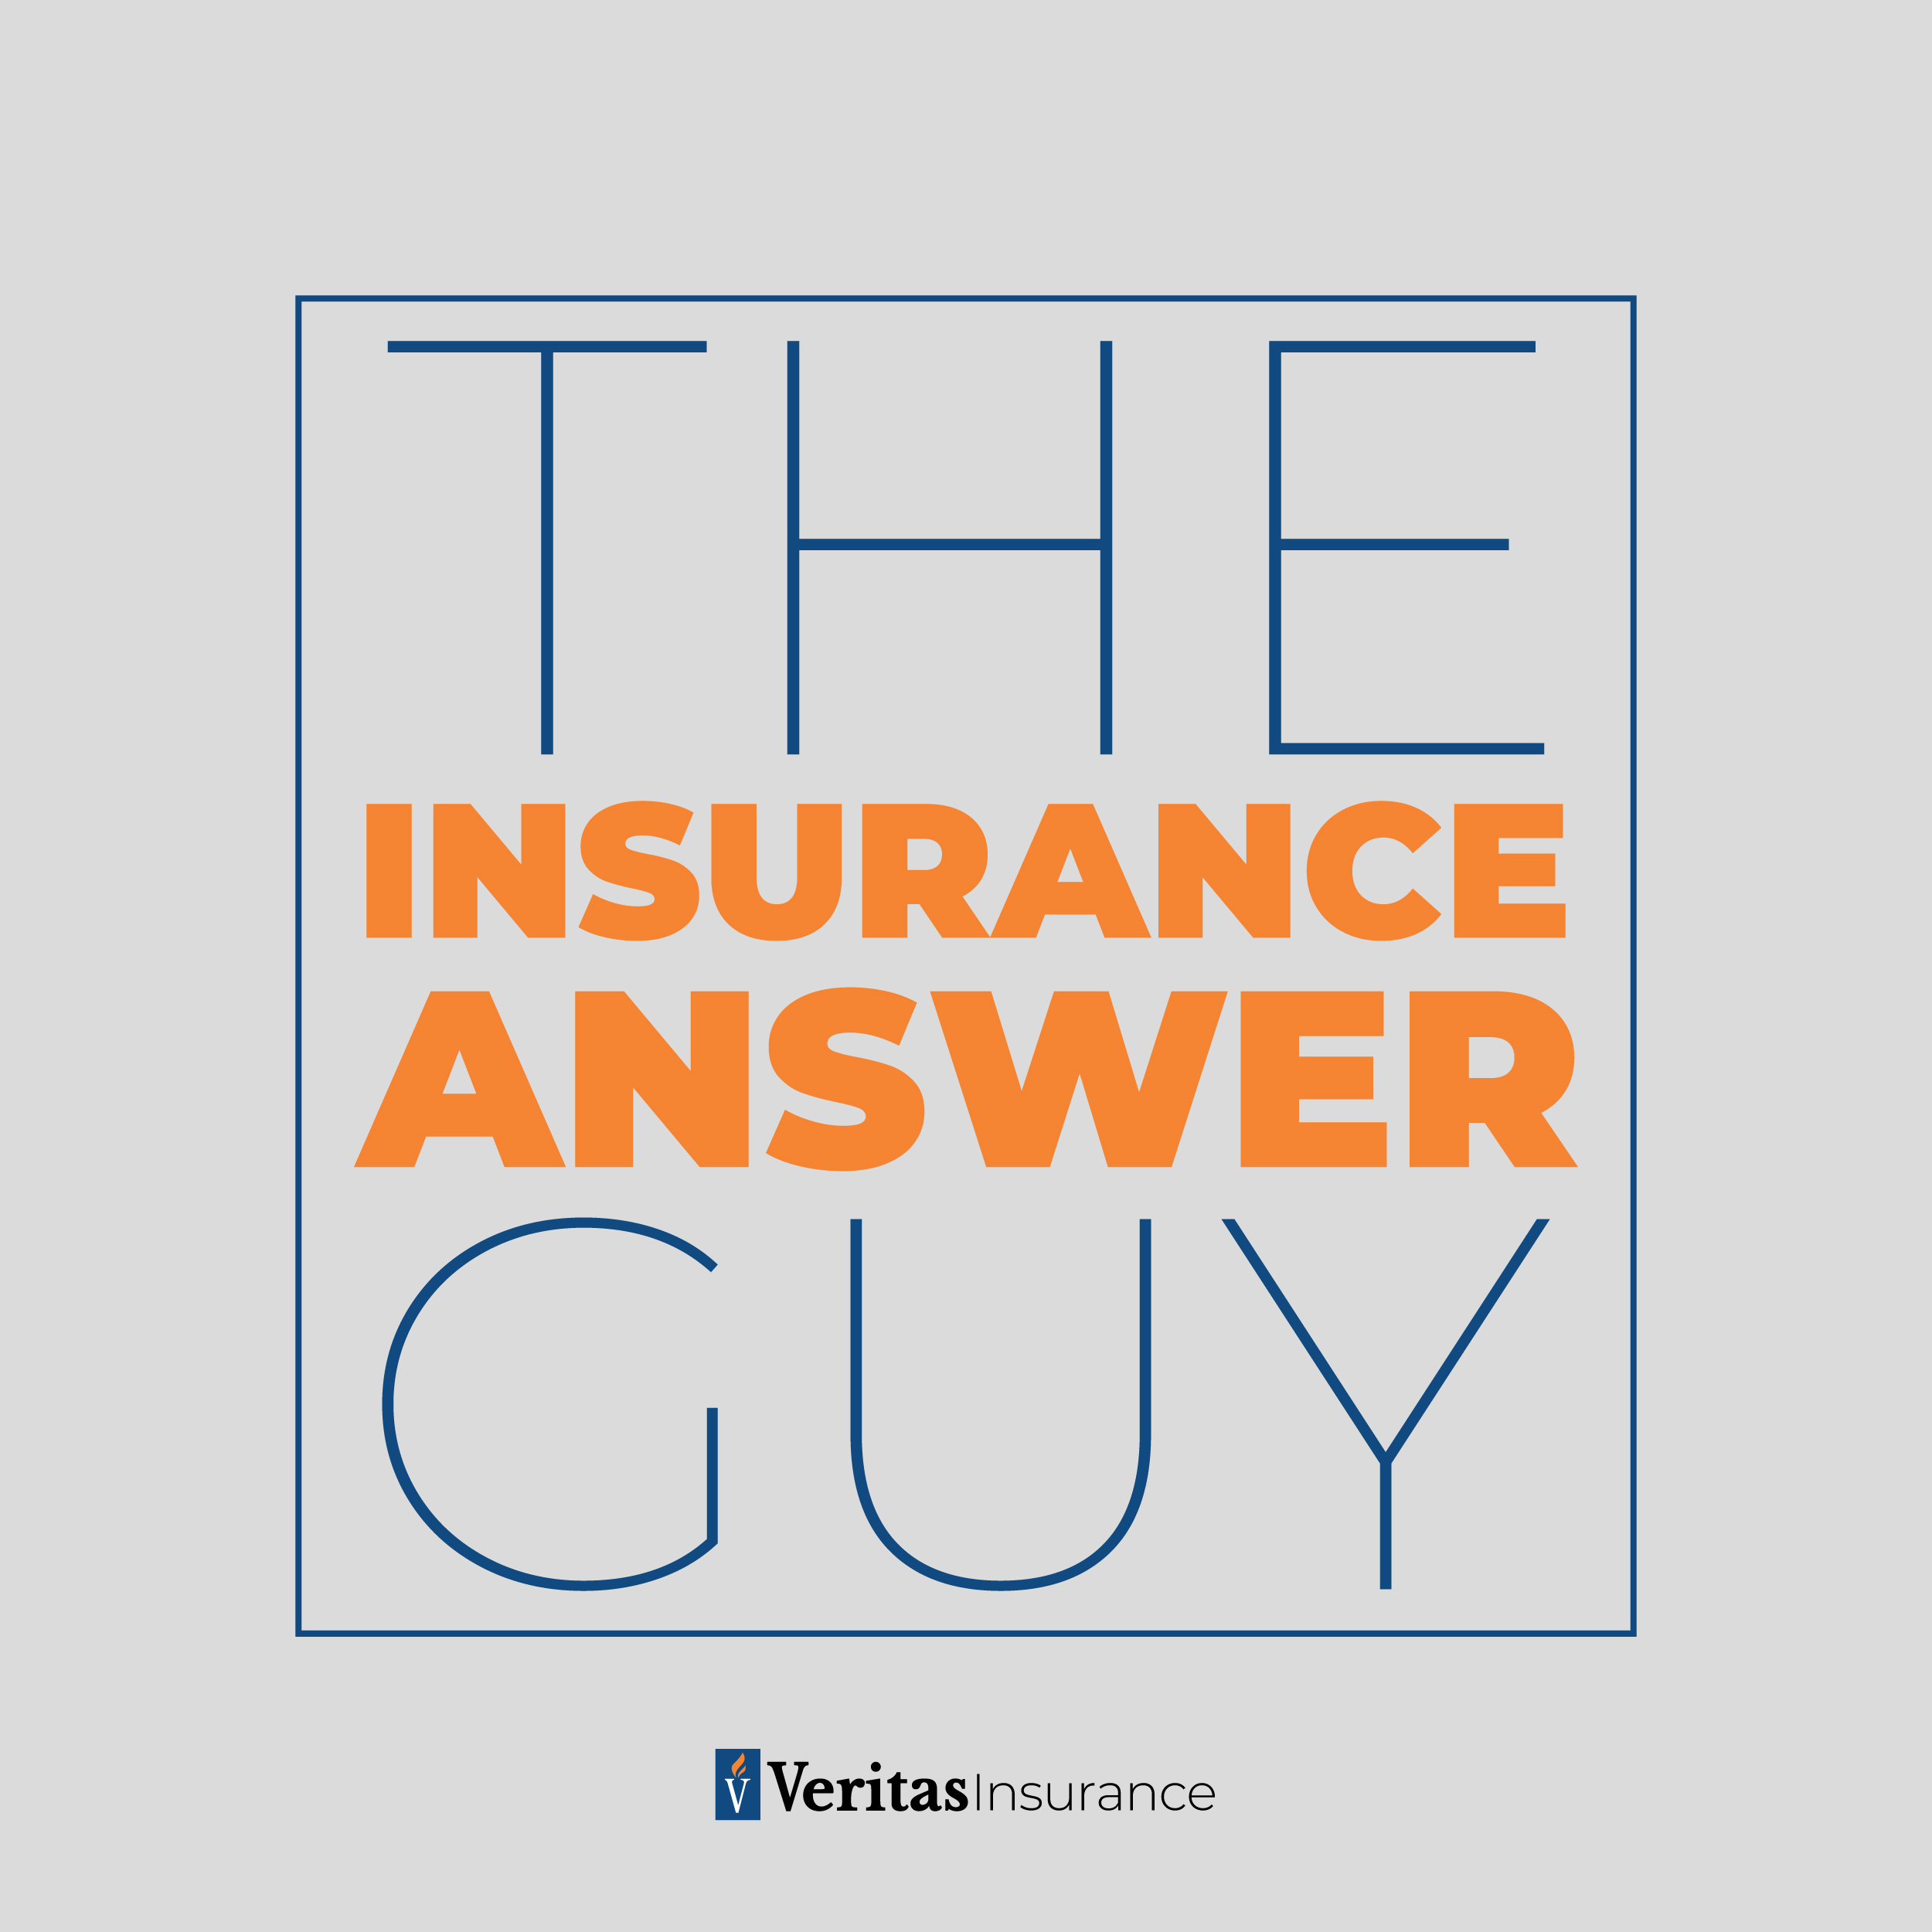 The Insurance Answer Guy